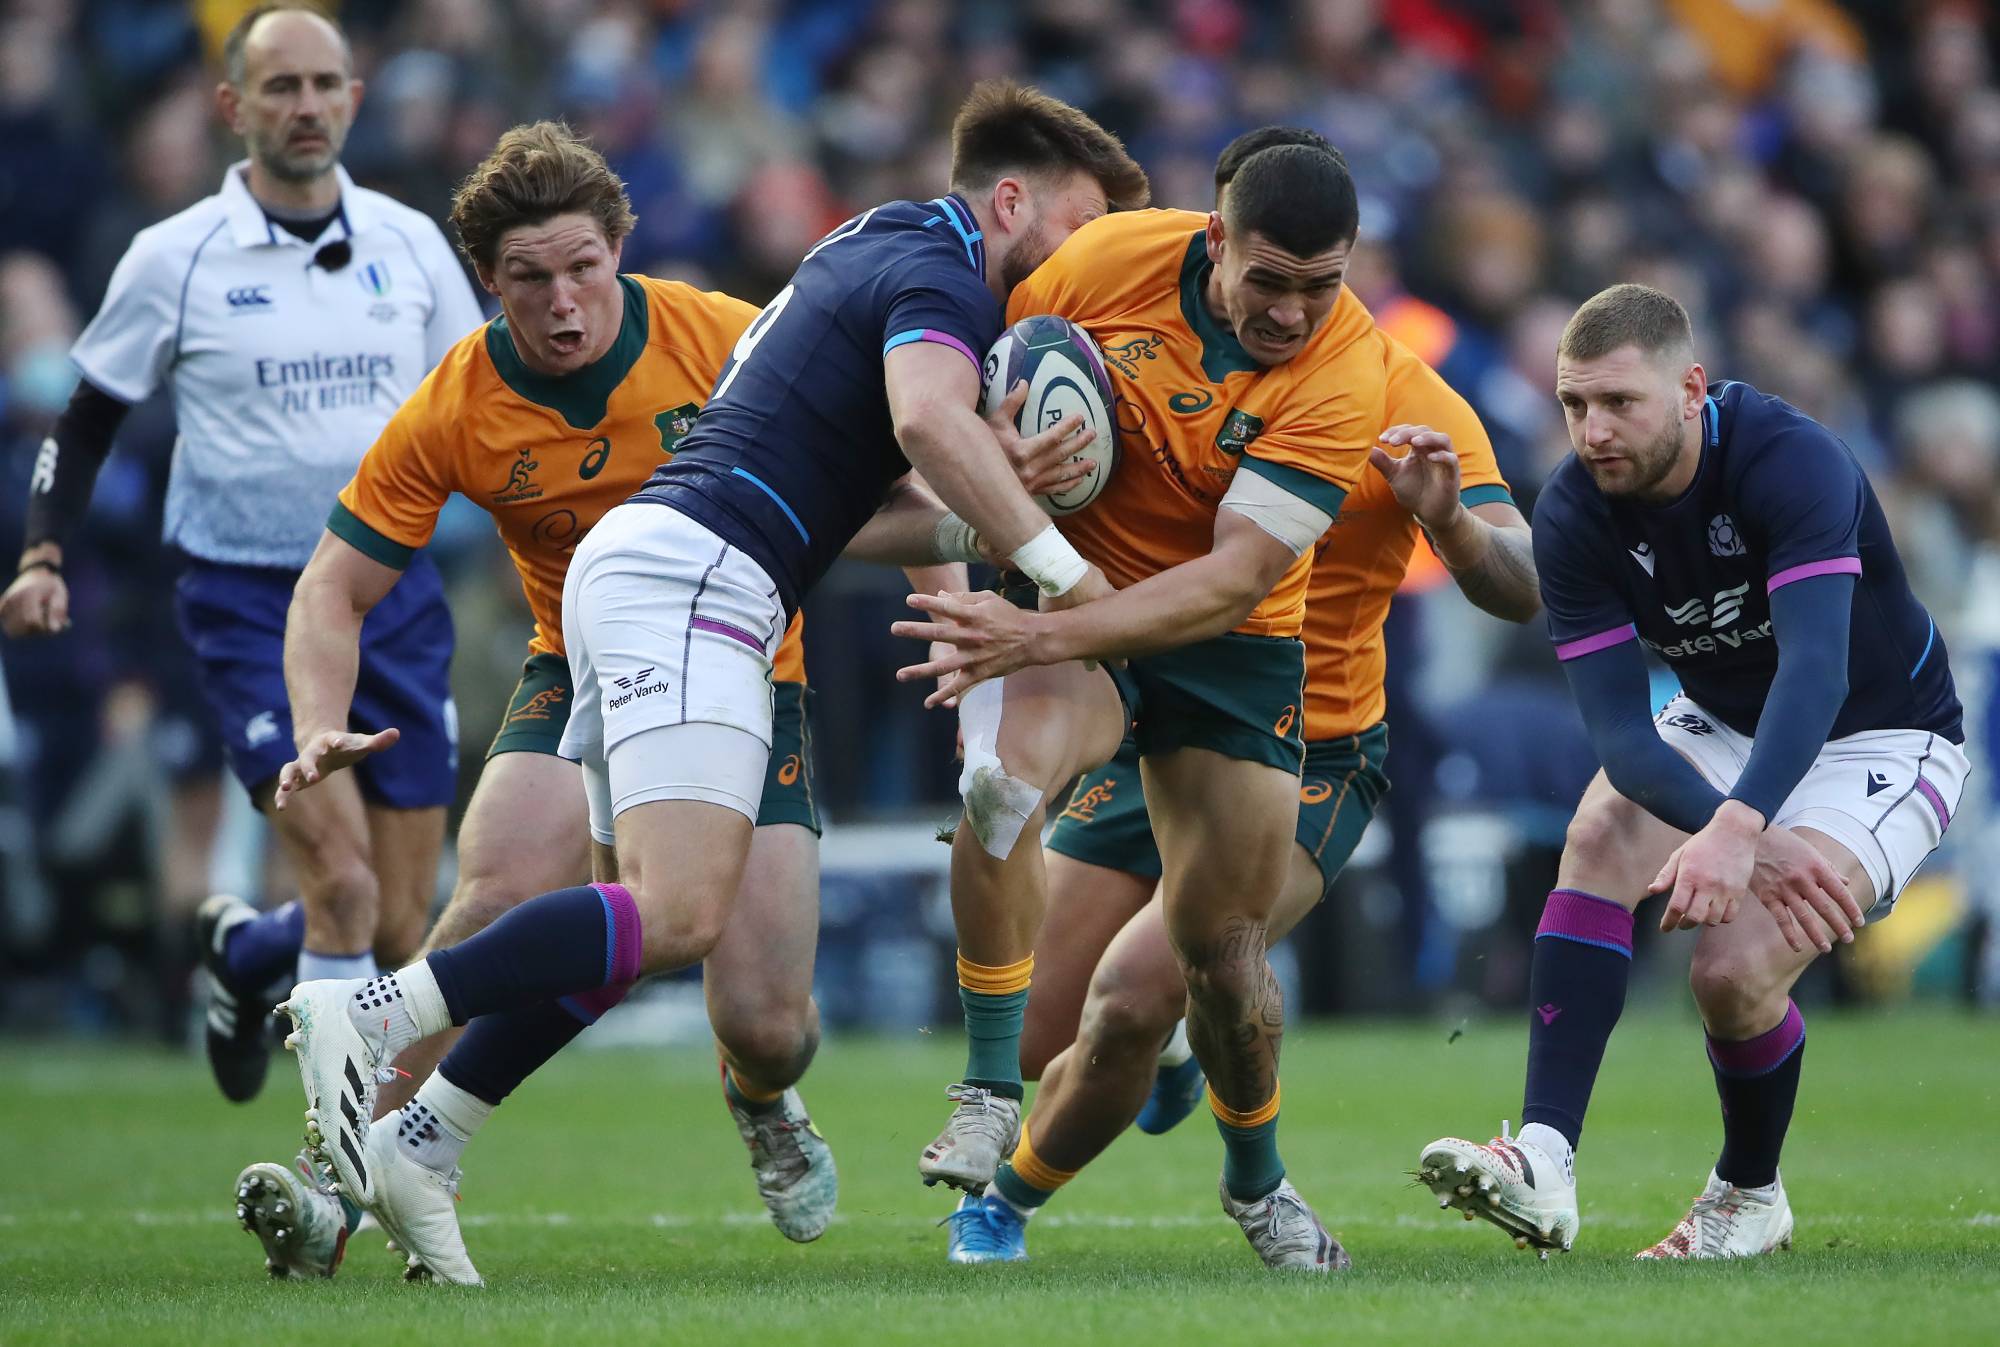  Izaia Perese of Australia is tackled by Ali Price and Finn Russell of Scotland during the Autumn Nations Series match between Scotland and Australia at Murrayfield Stadium on November 07, 2021 in Edinburgh, Scotland. (Photo by Ian MacNicol/Getty Images)